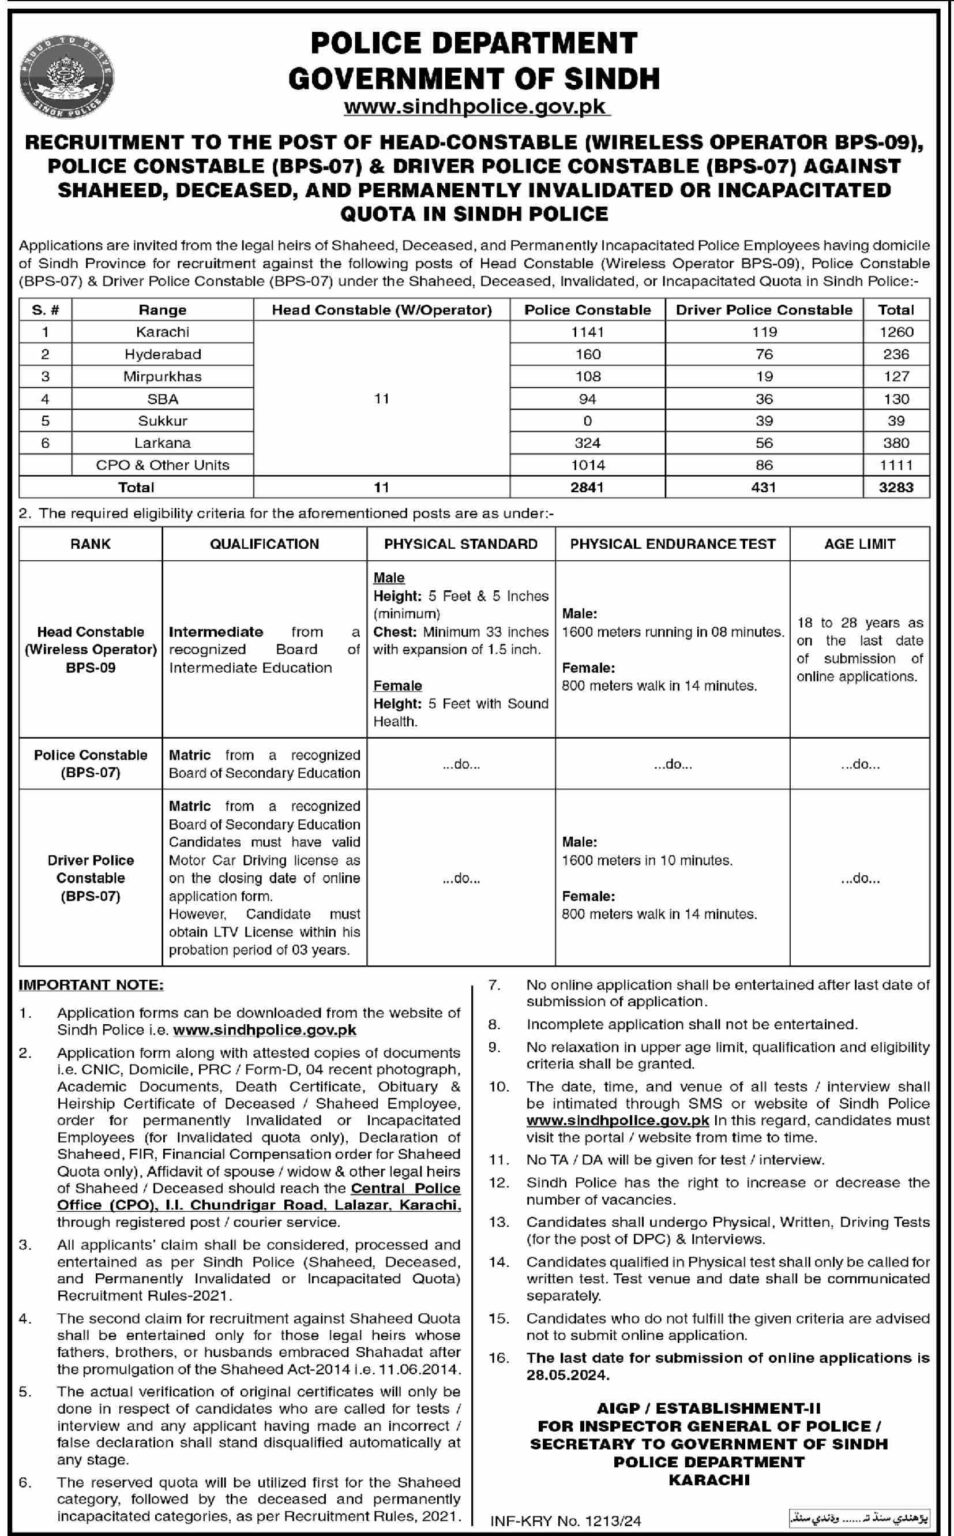 Recruitment to the Post of Head-Constable